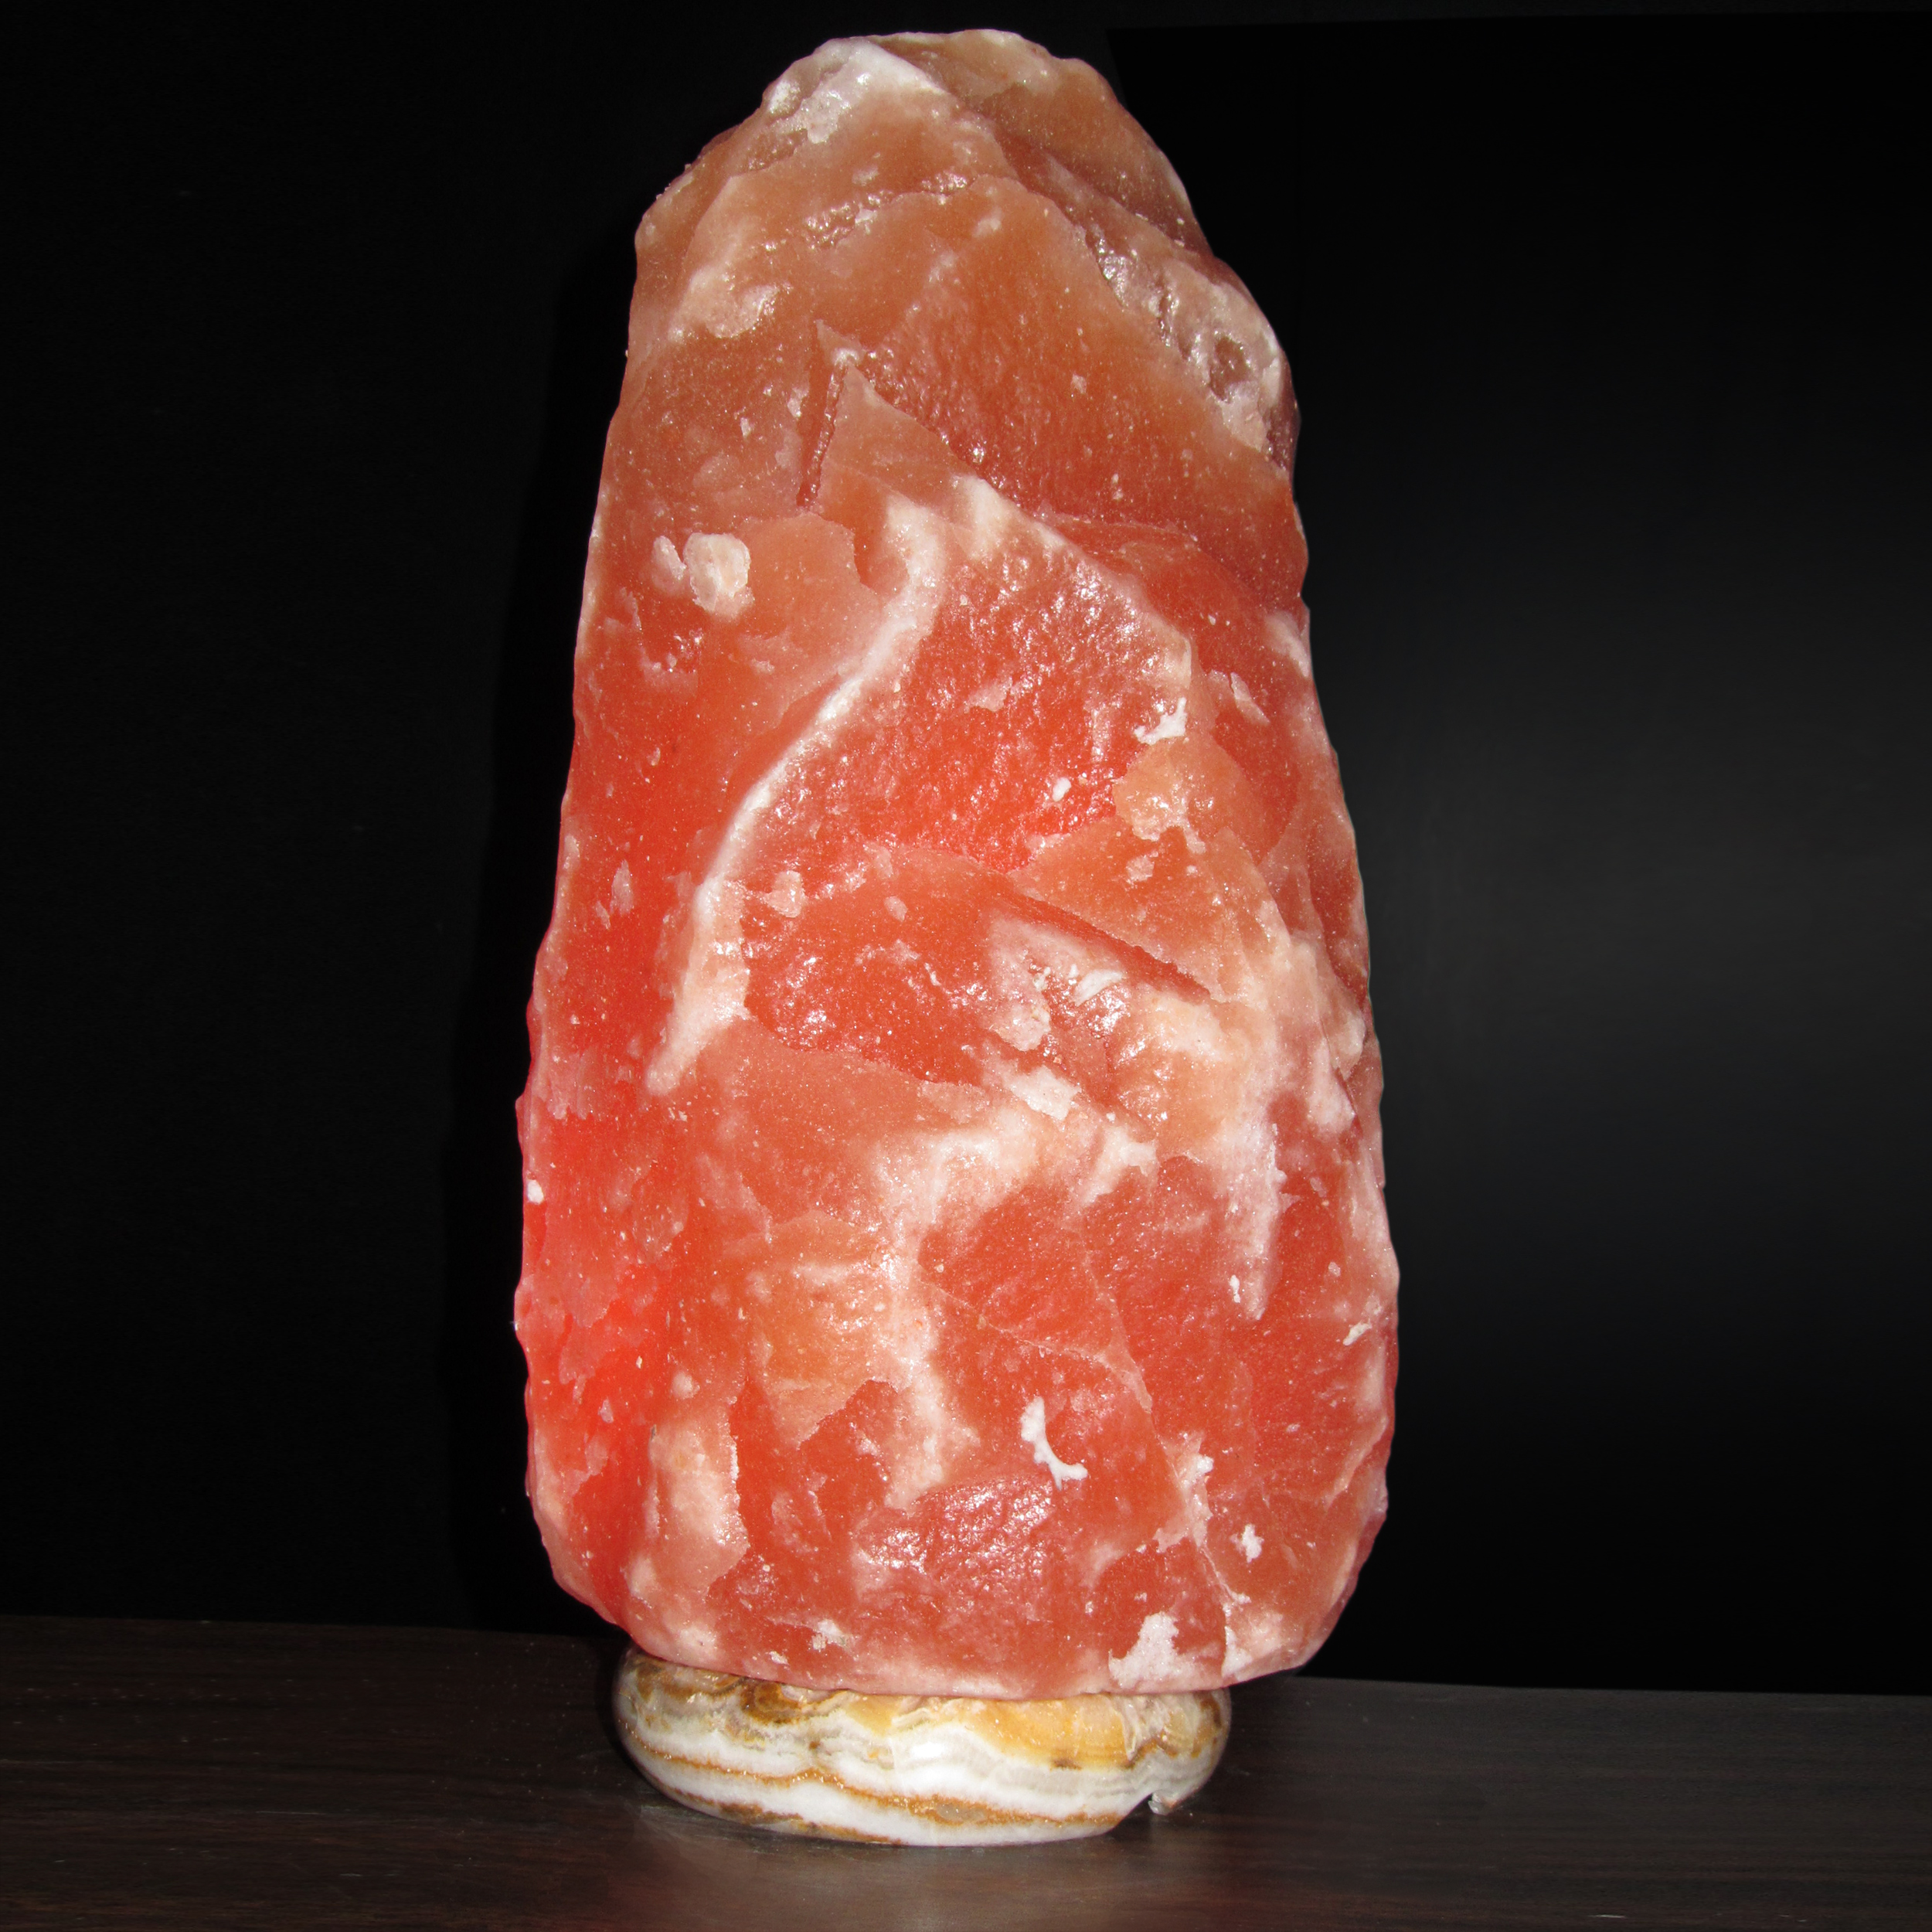 Sunrise 10 in. Natural Salt Lamp Height:11-15 Pound - on Onyx Marble Base- Himalayan Natural Crystal Salt Lamp with Bulb and Cord